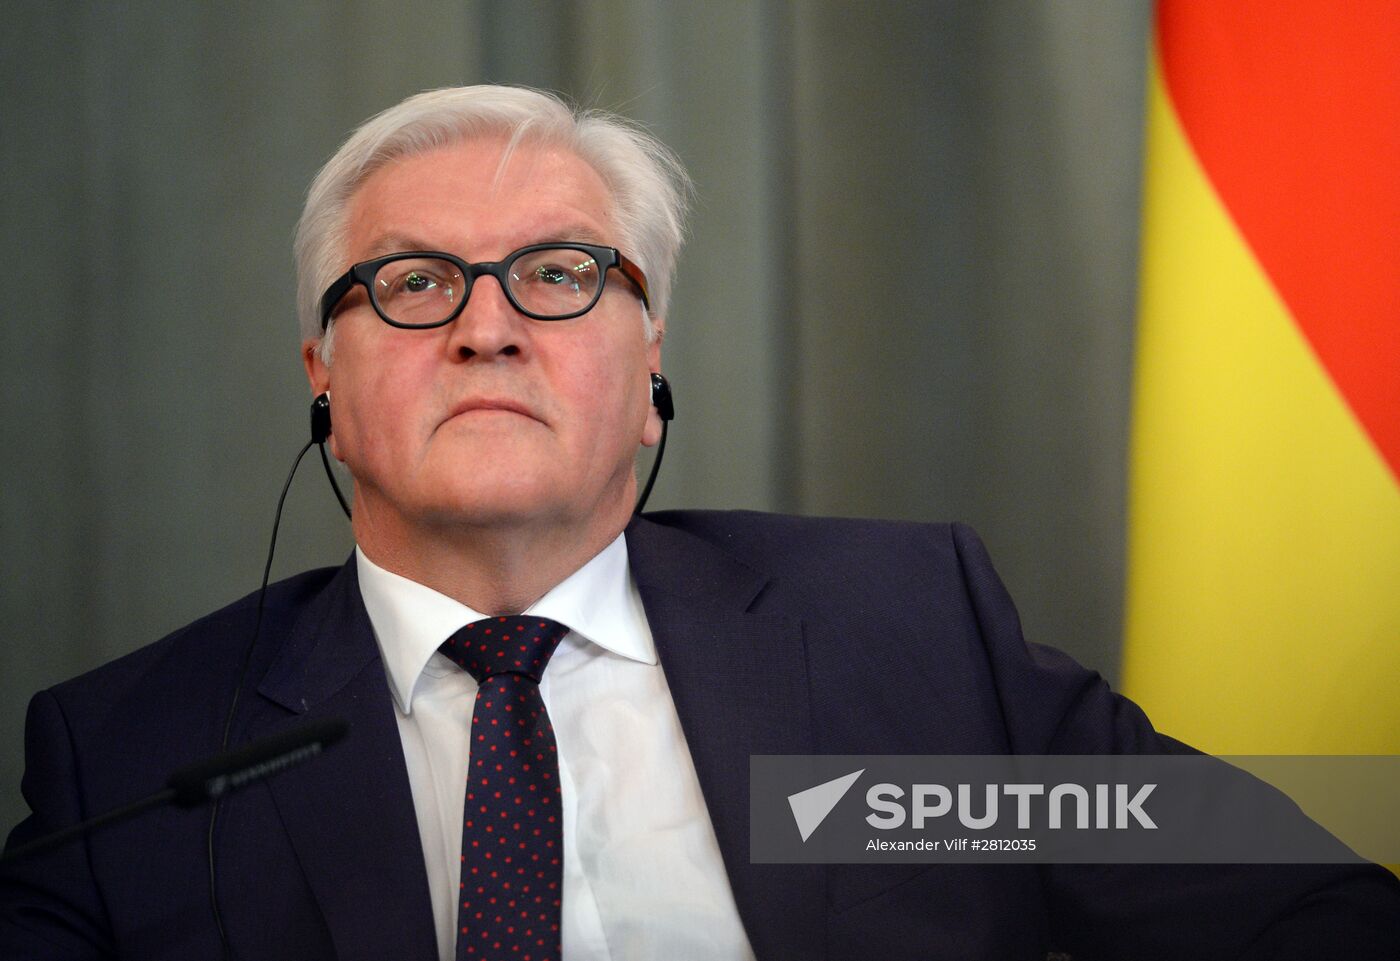 Russian Foreign Minister Sergey Lavrov meets with German Foreign Minister Frank-Walter Steinmeier